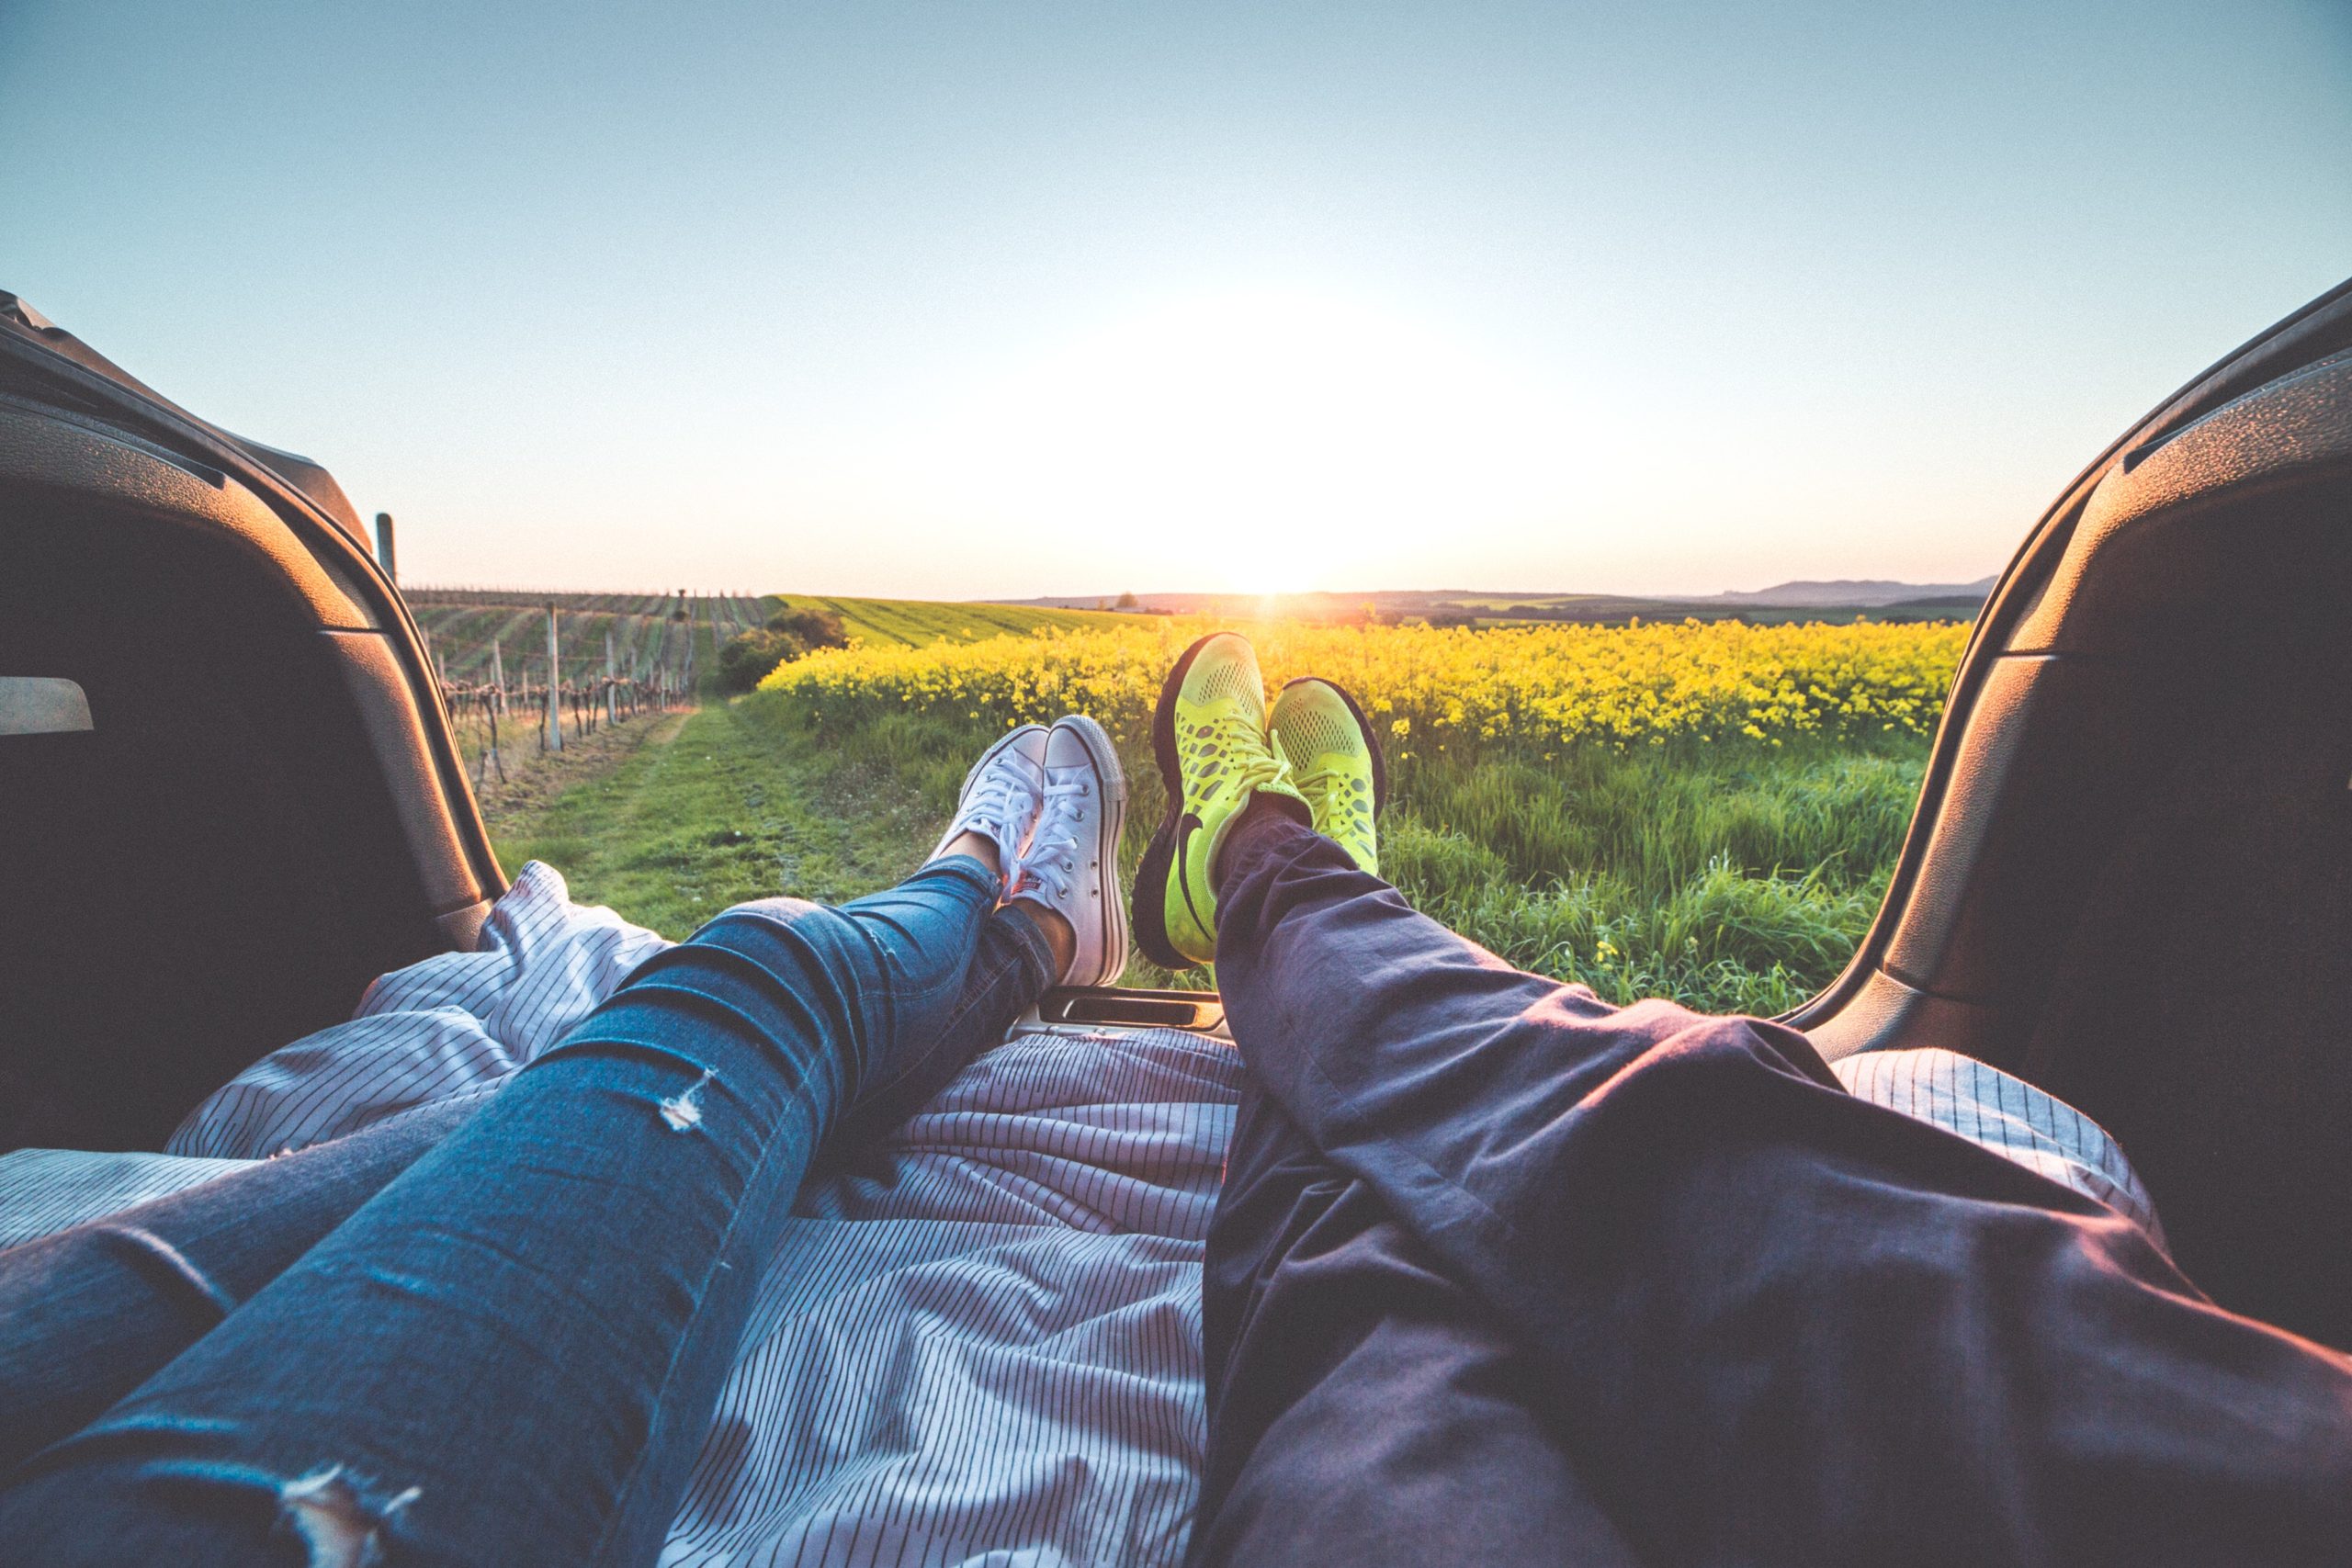 View of couple's feet as they sit in the back of a car and watch a scenic sunset over a field of flowers